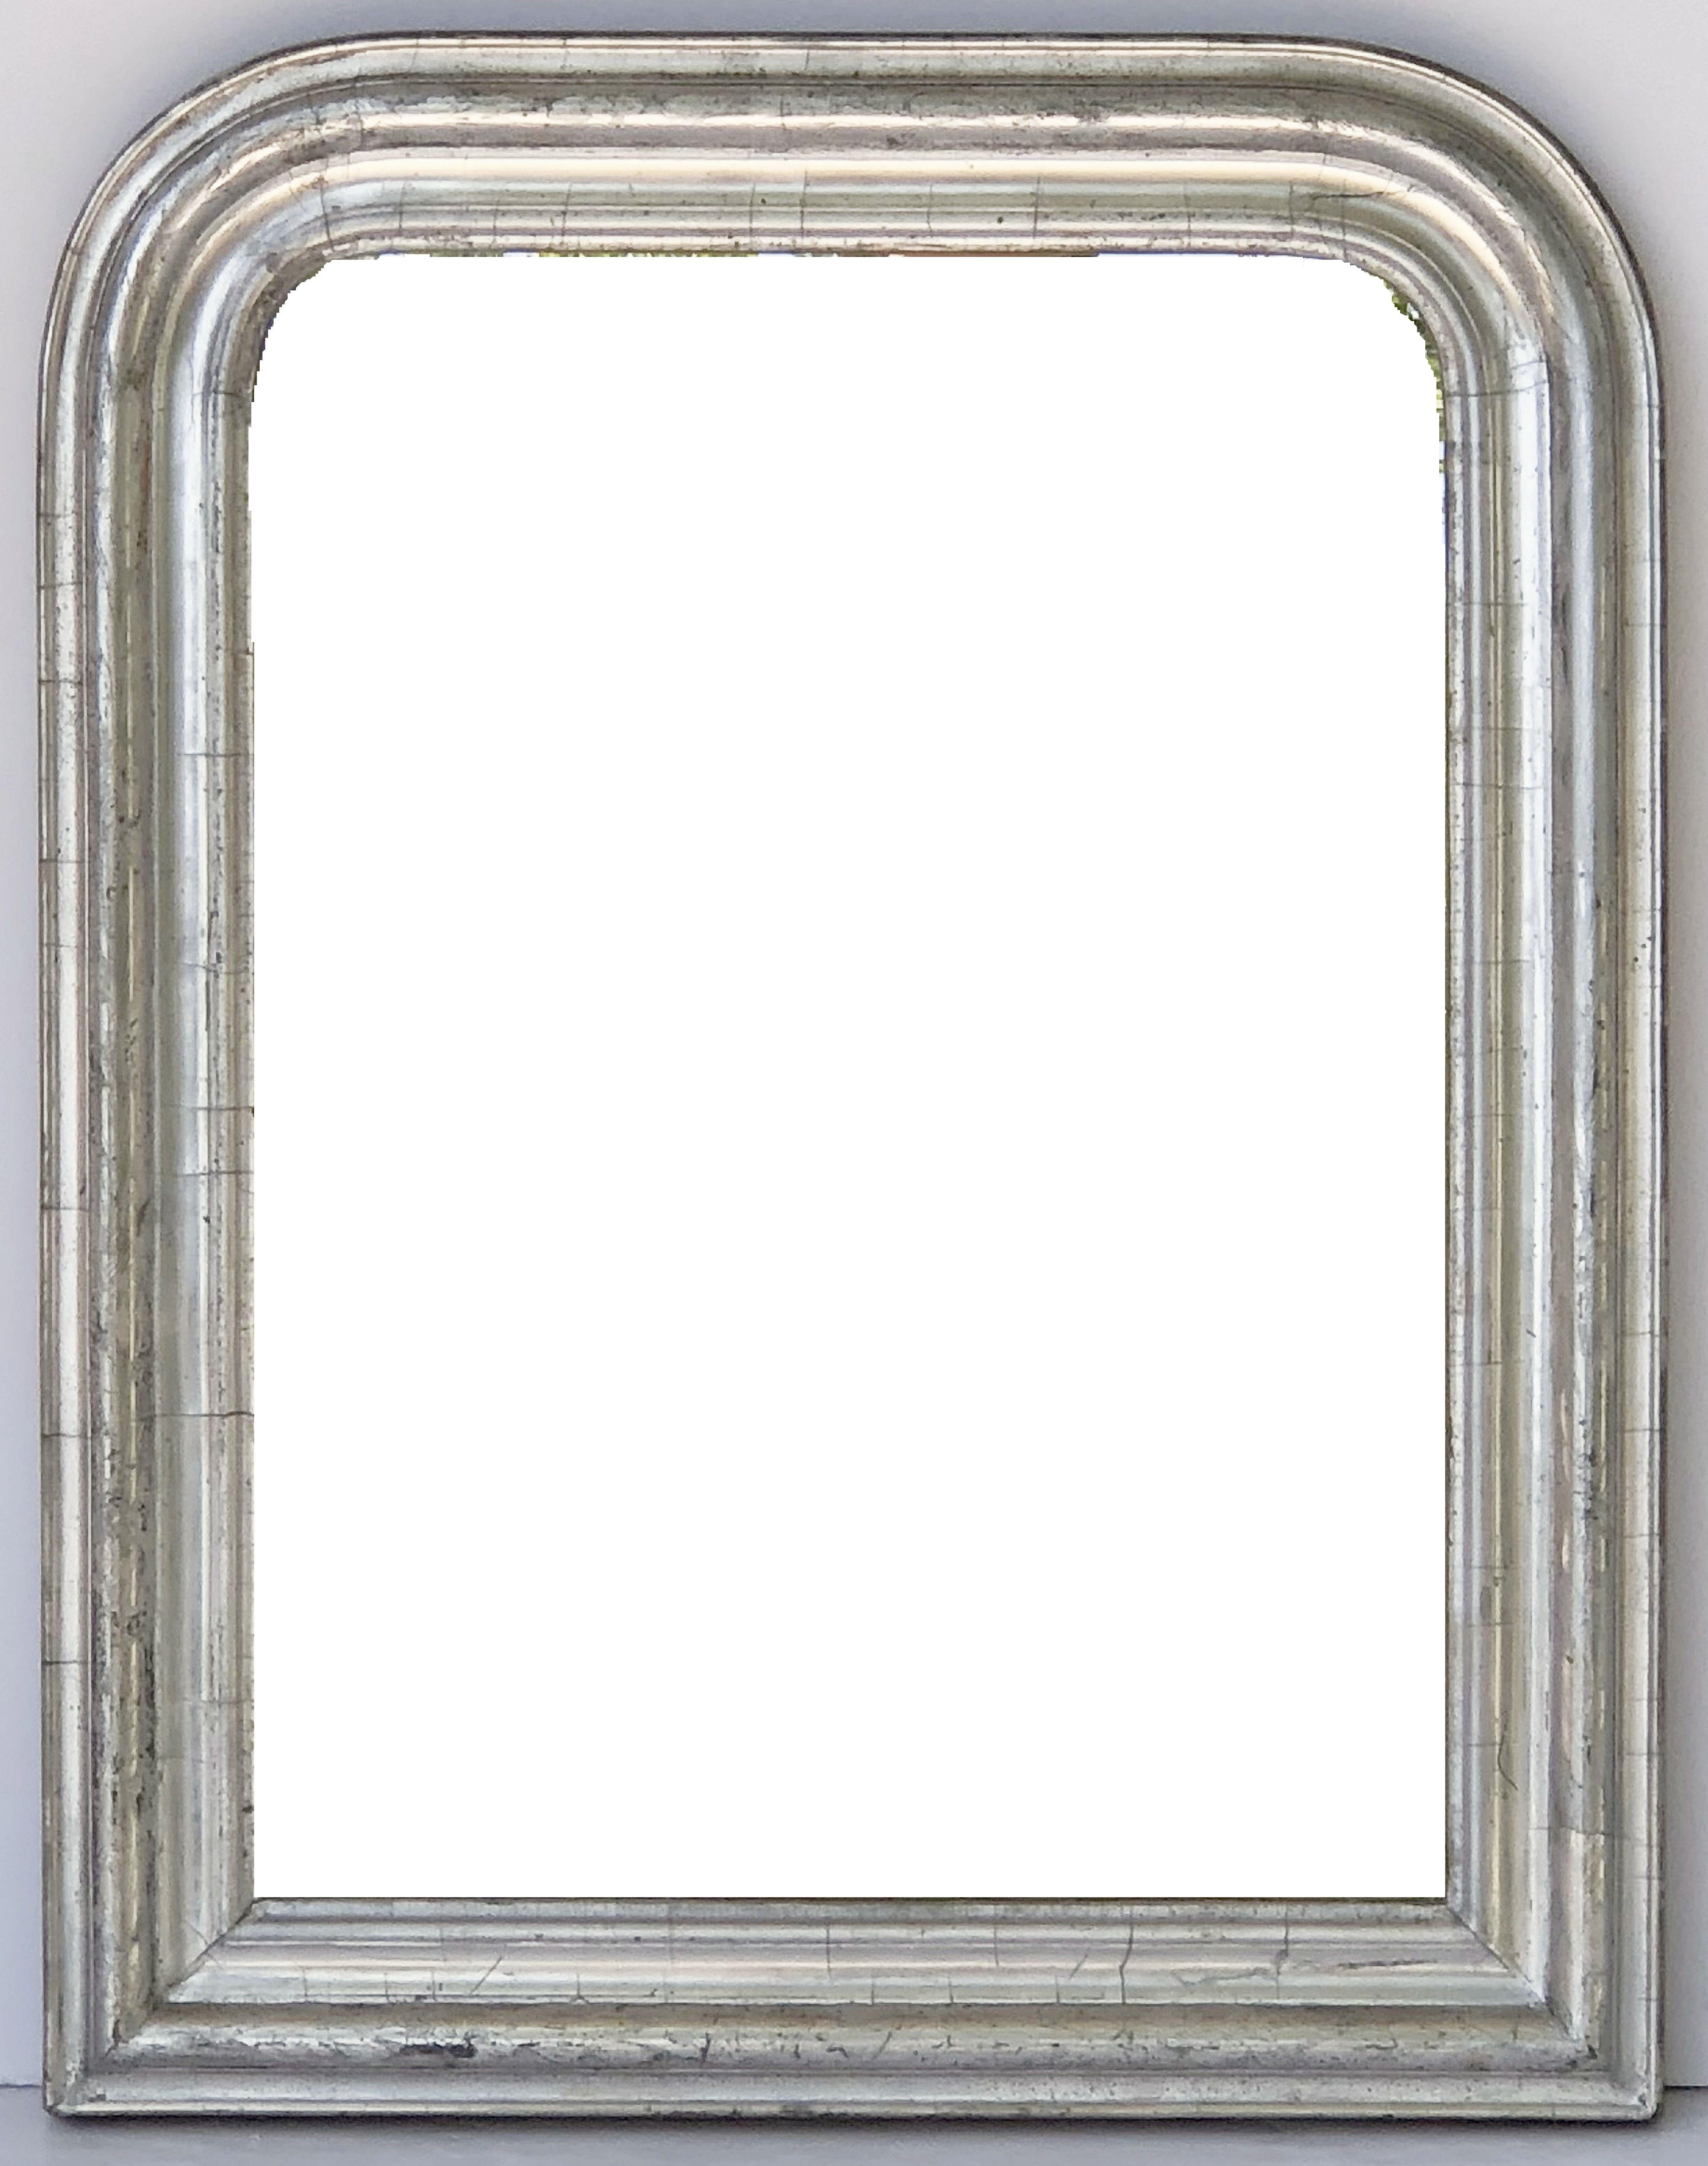 A fine Louis Philippe wall mirror from France, featuring a moulded surround with a beautiful patinated silver-leaf.

Dimensions: H 26 inches x W 20.25 inches

Other sizes available in this style